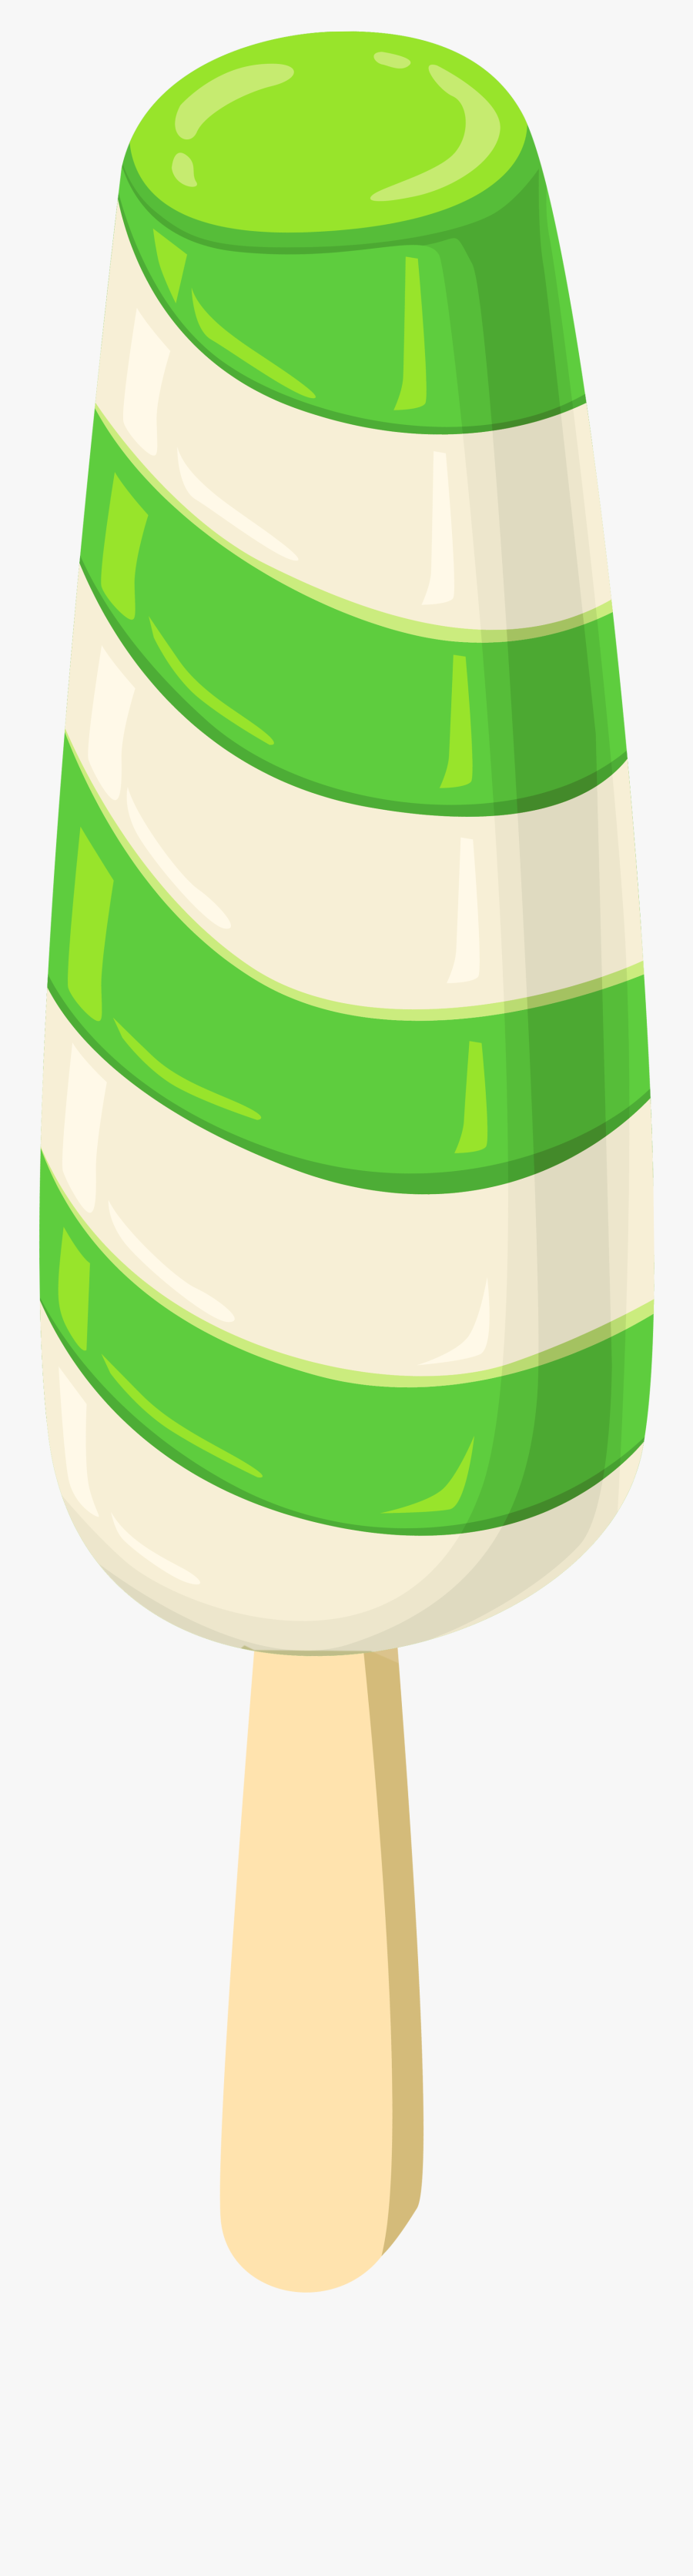 Ice Cream Green And White, Transparent Clipart